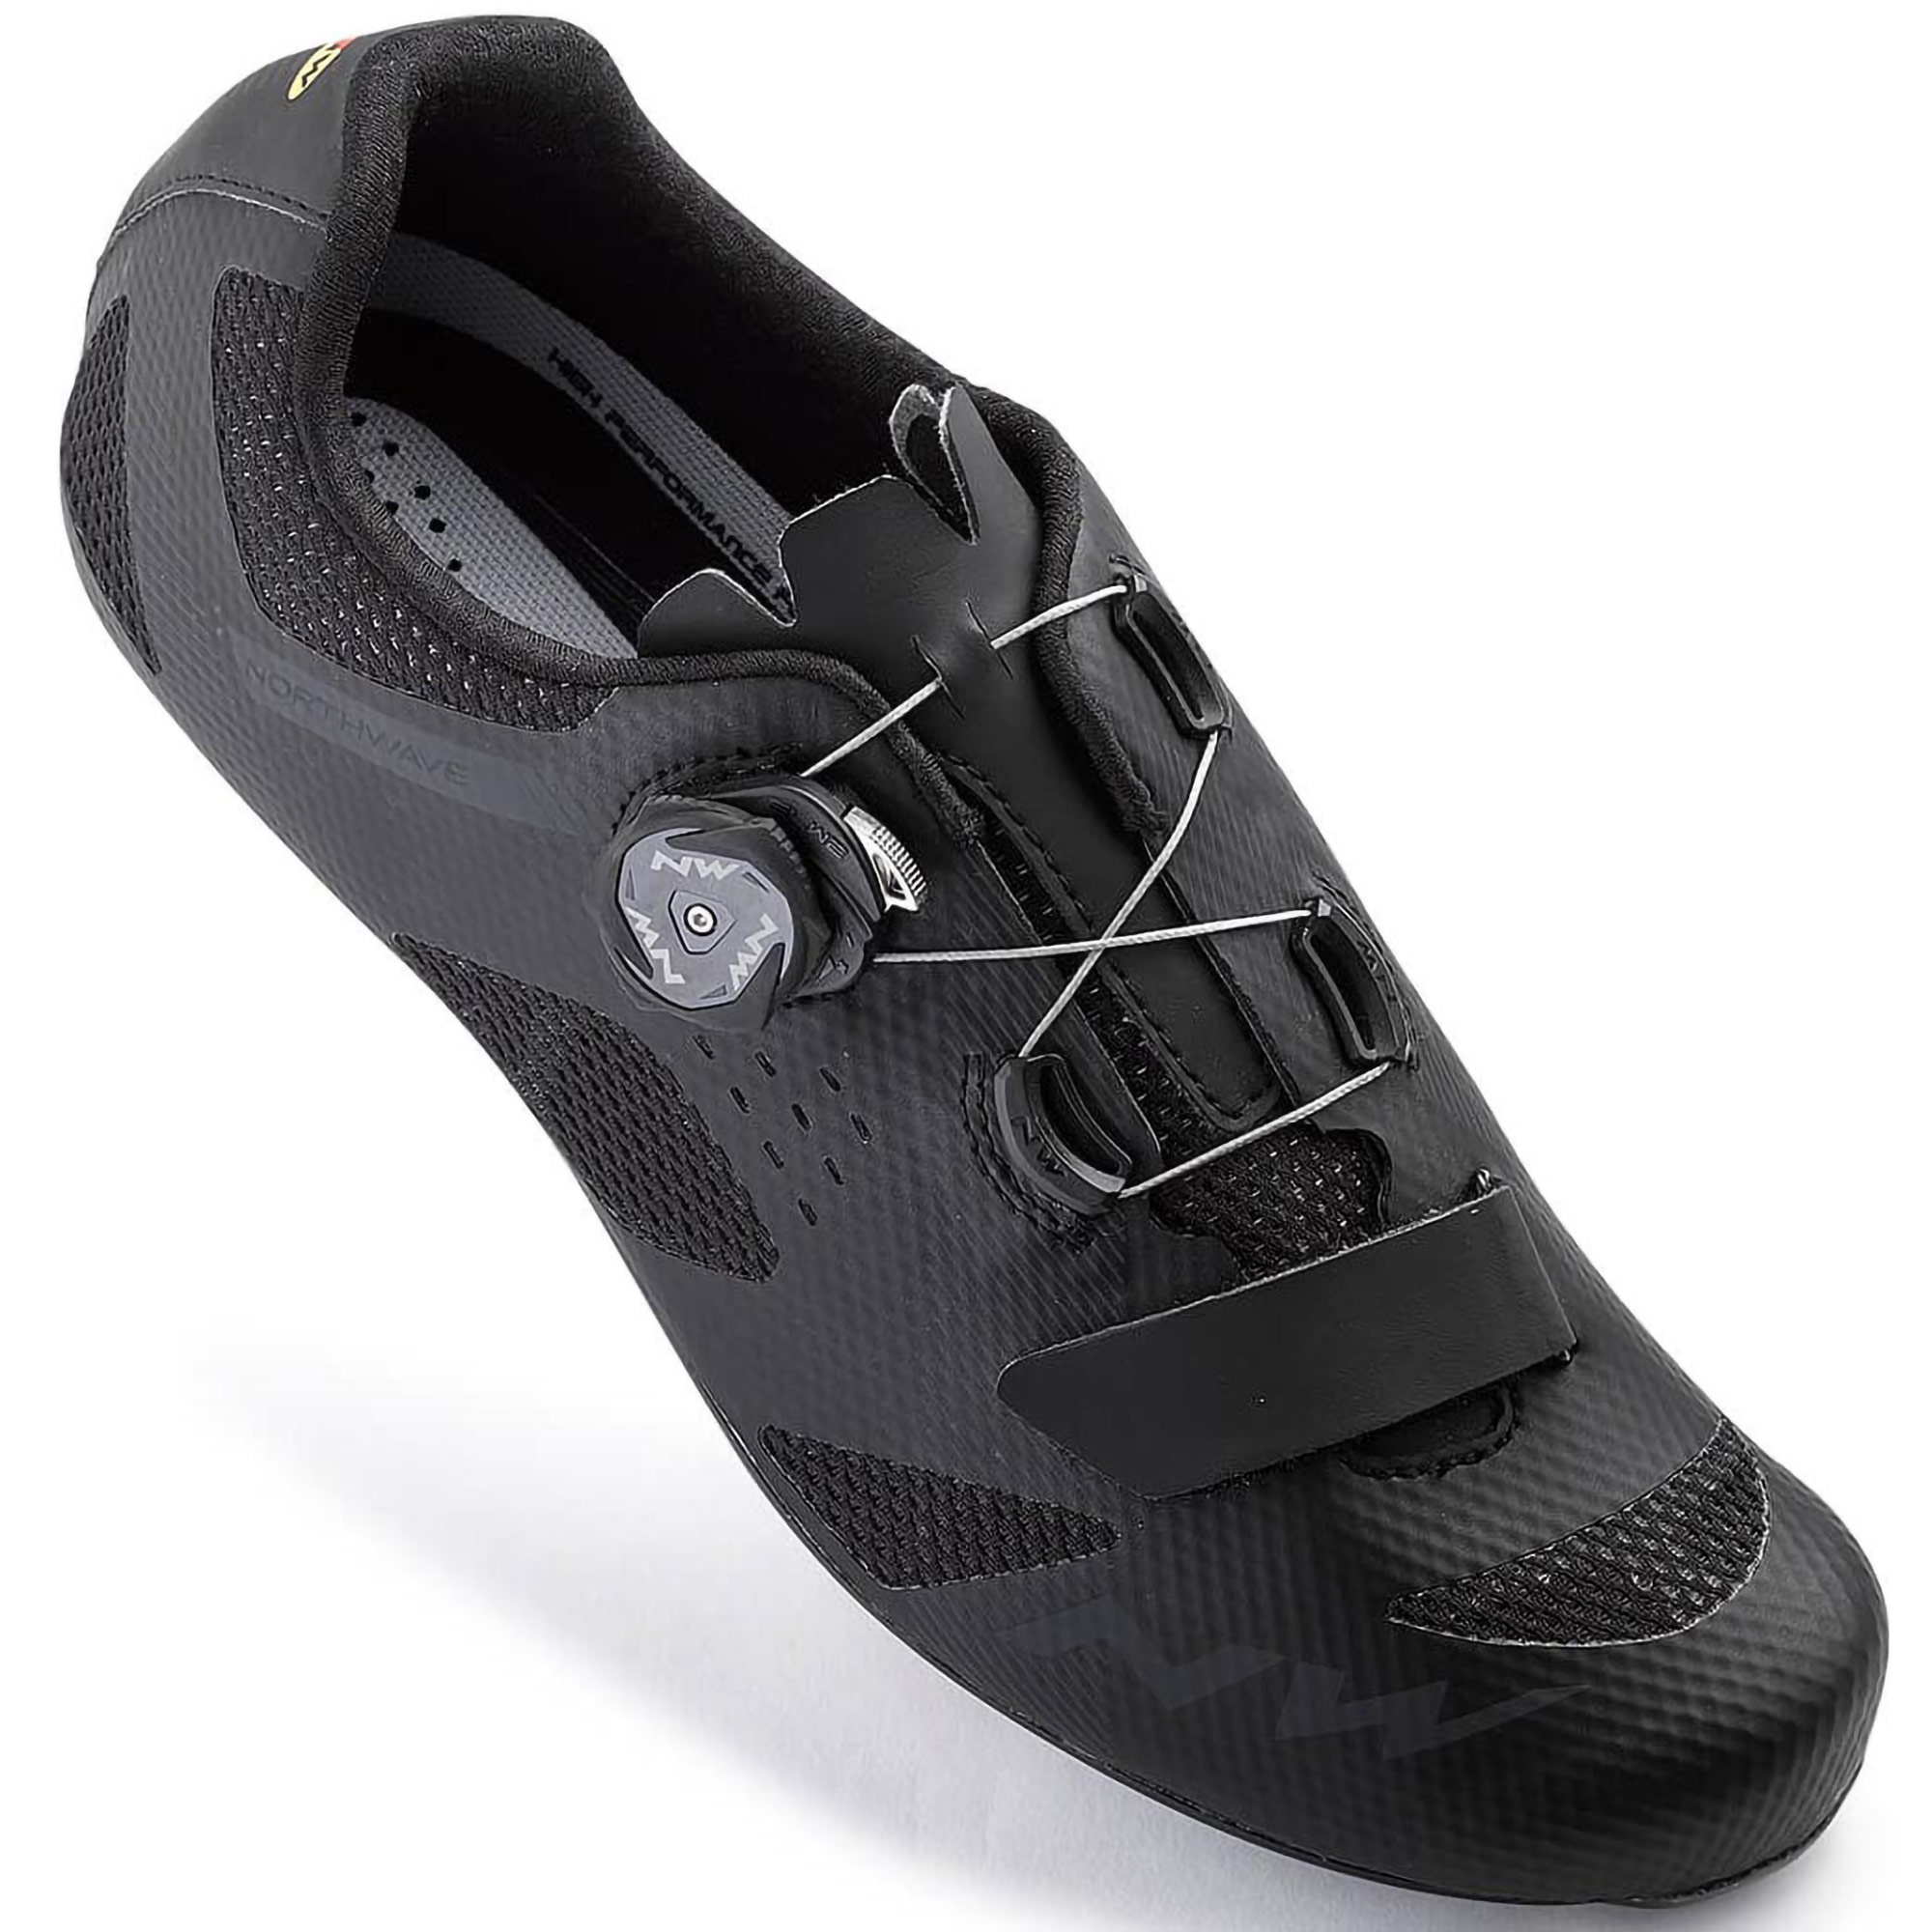 Northwave Storm Road Cycling Bike Shoes 8030819057454 eBay